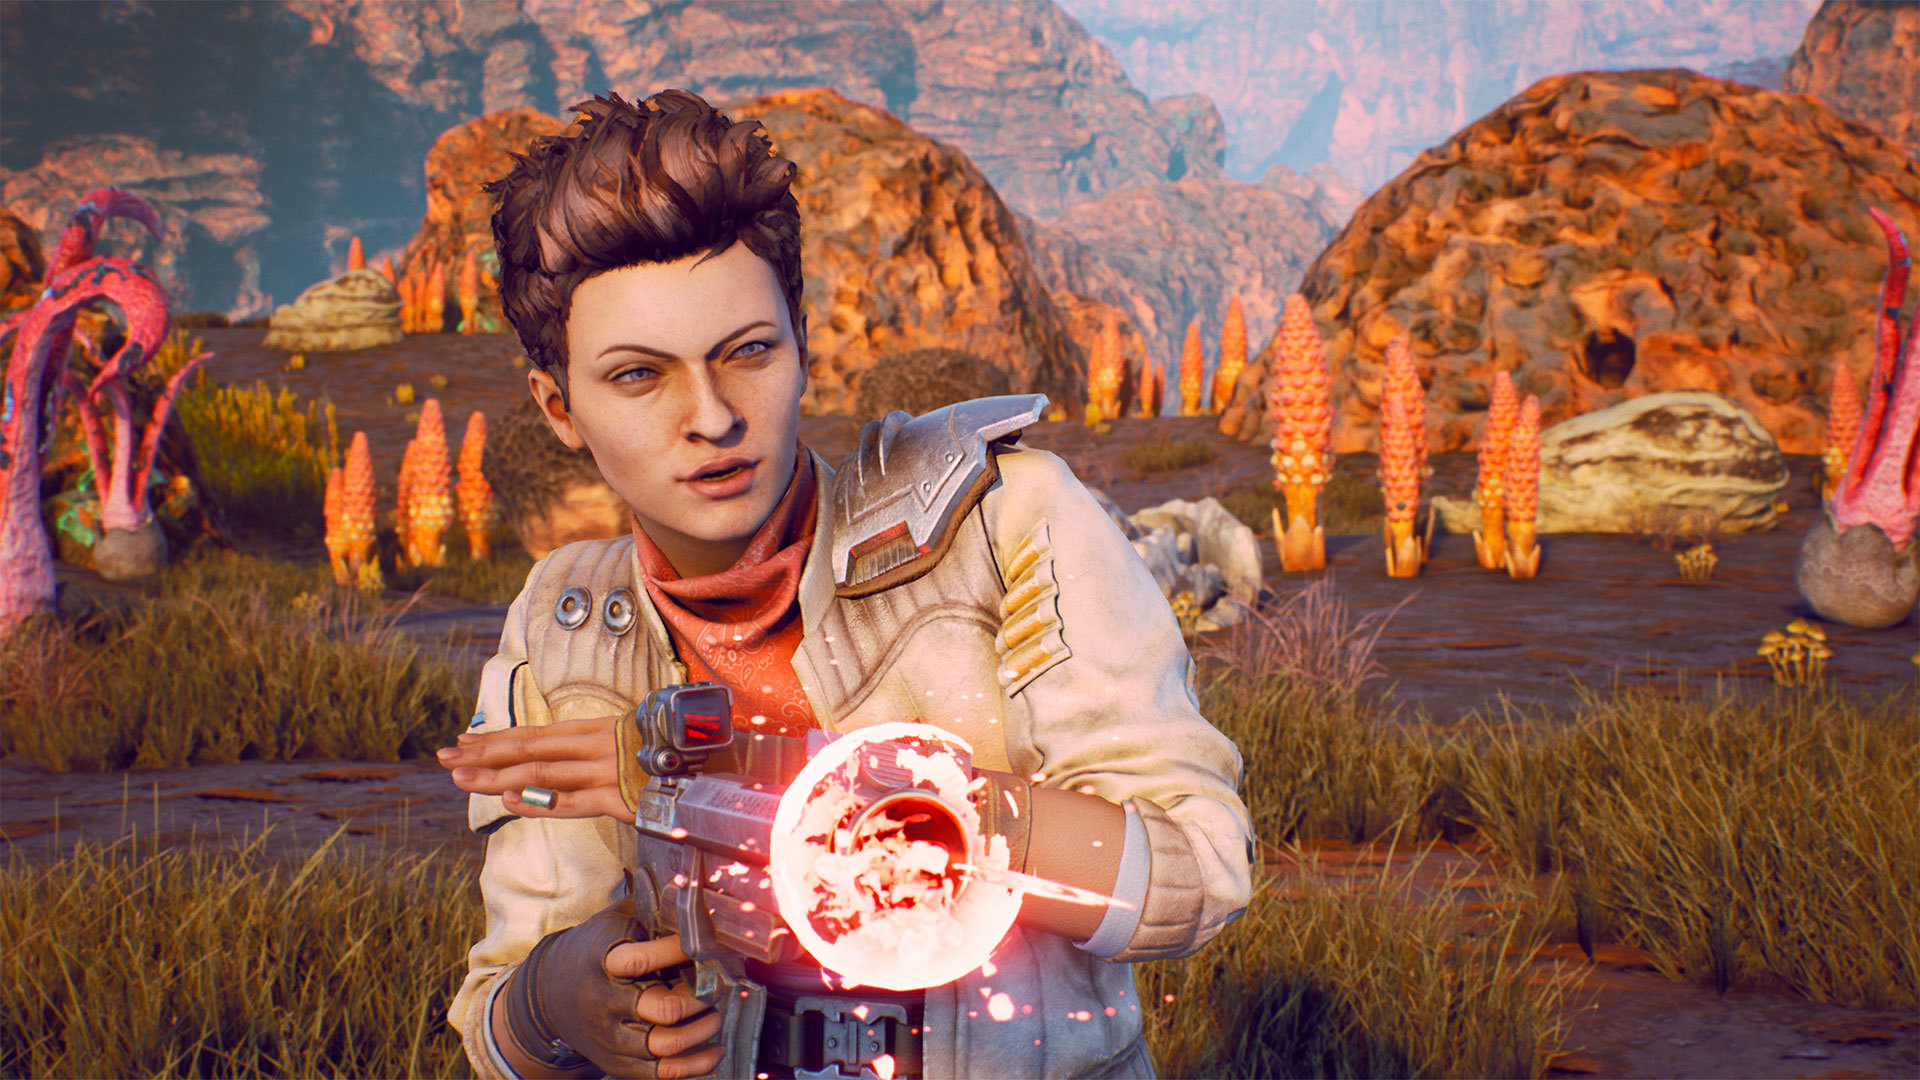 download free the outer worlds beginner guide